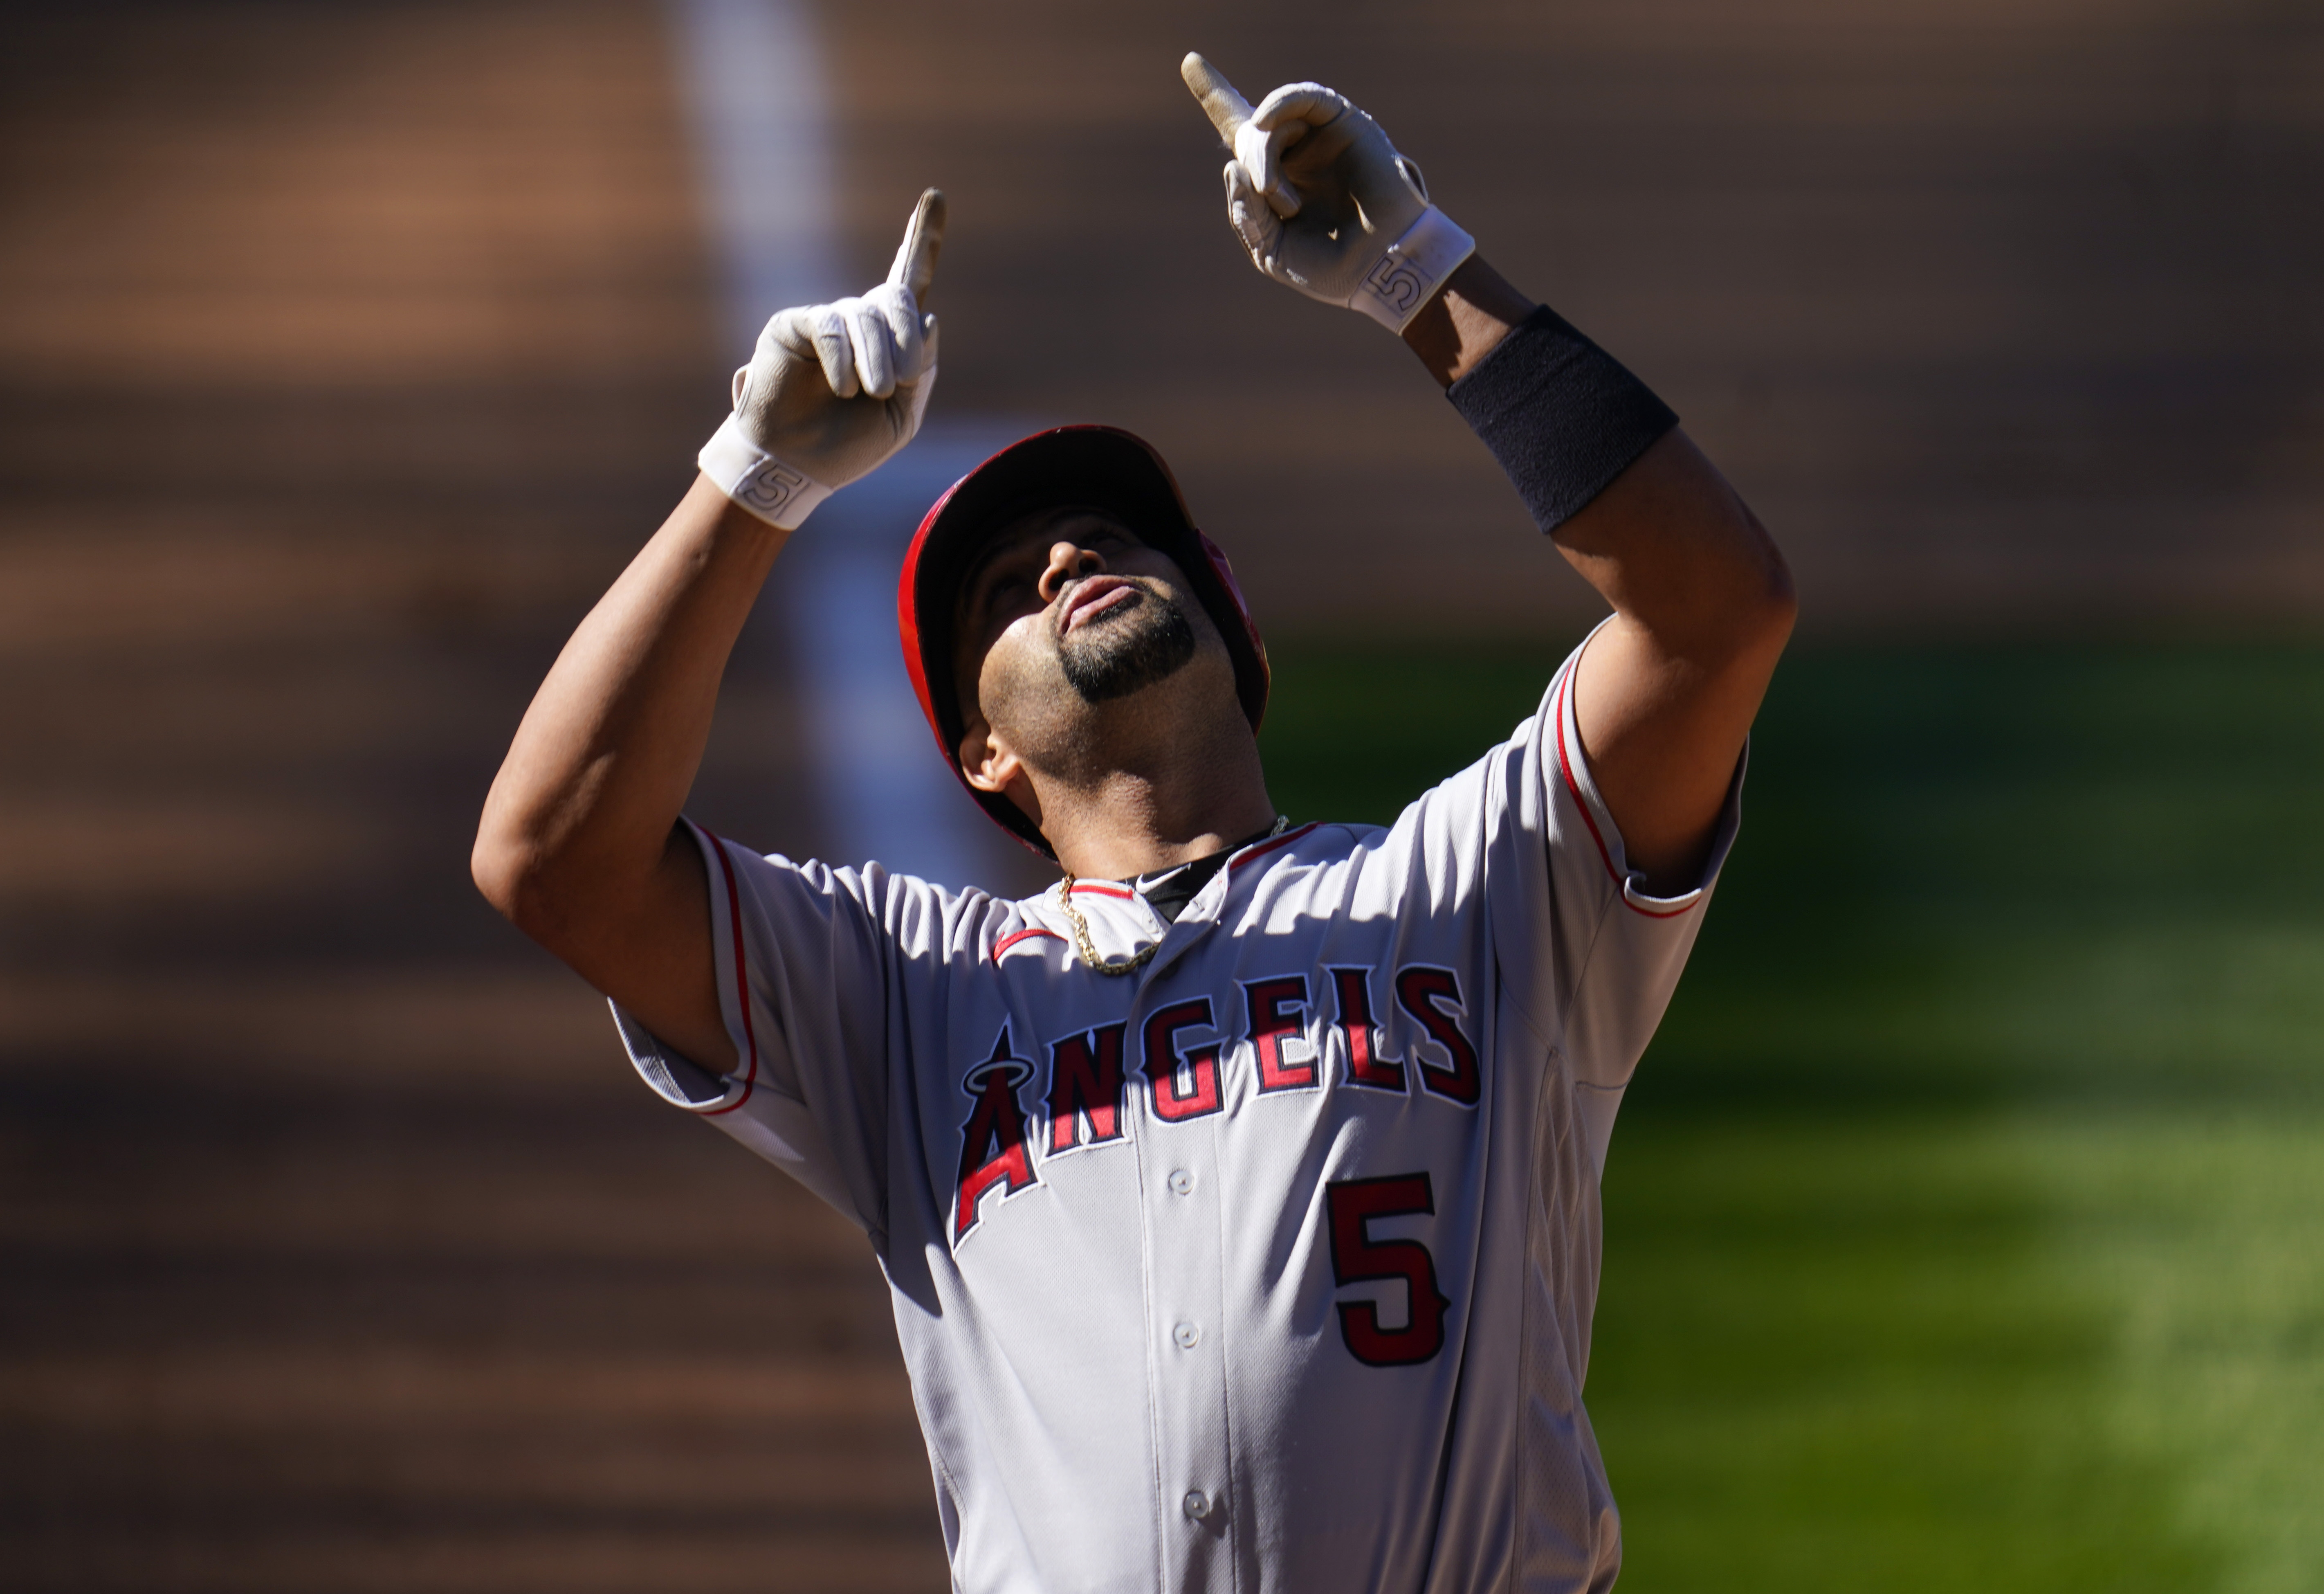 700! With two homers in LA, Cardinals great Albert Pujols launches